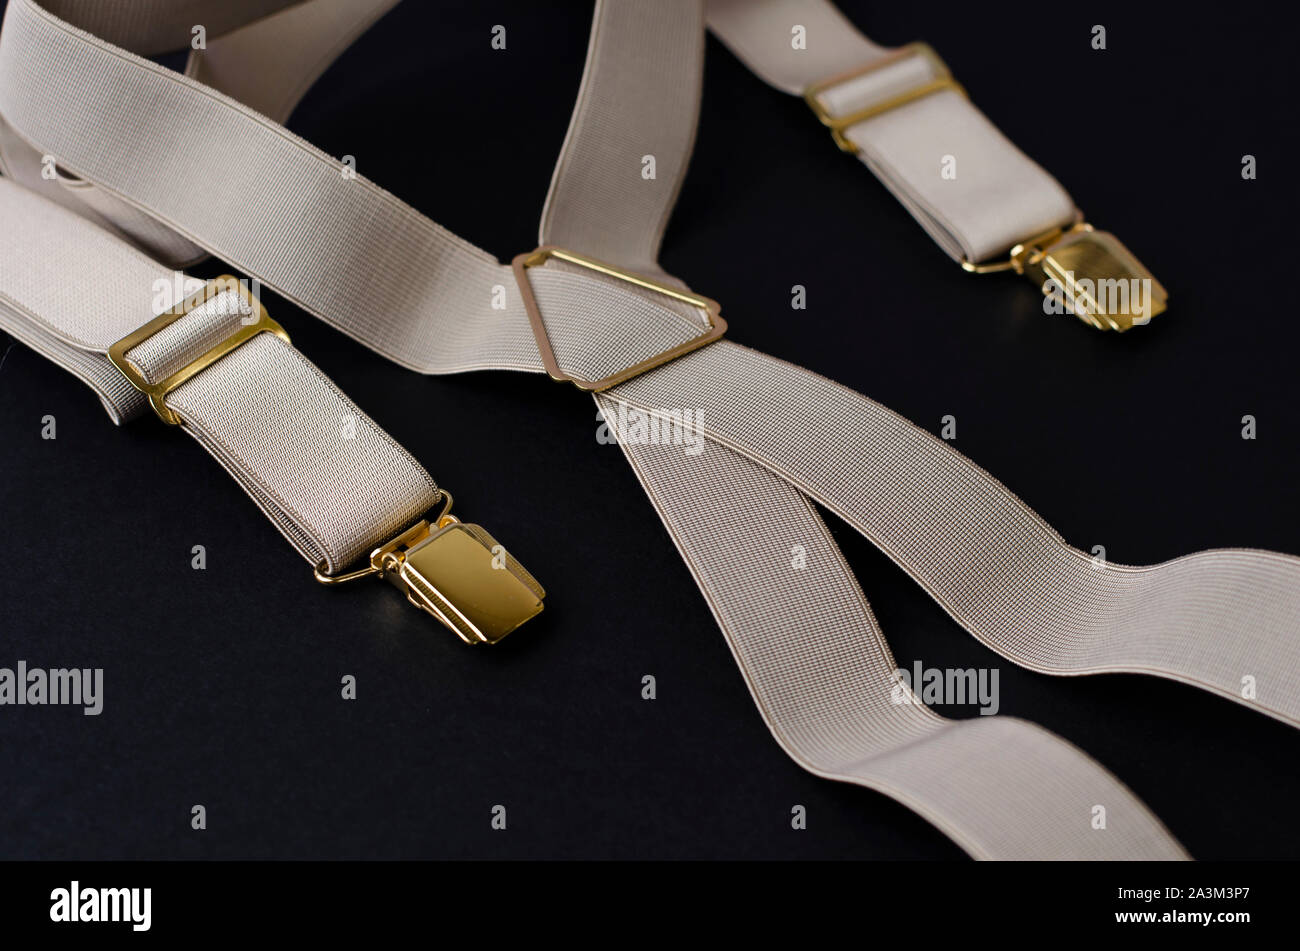 Stylish male braces or suspenders on black background.Top view Stock Photo